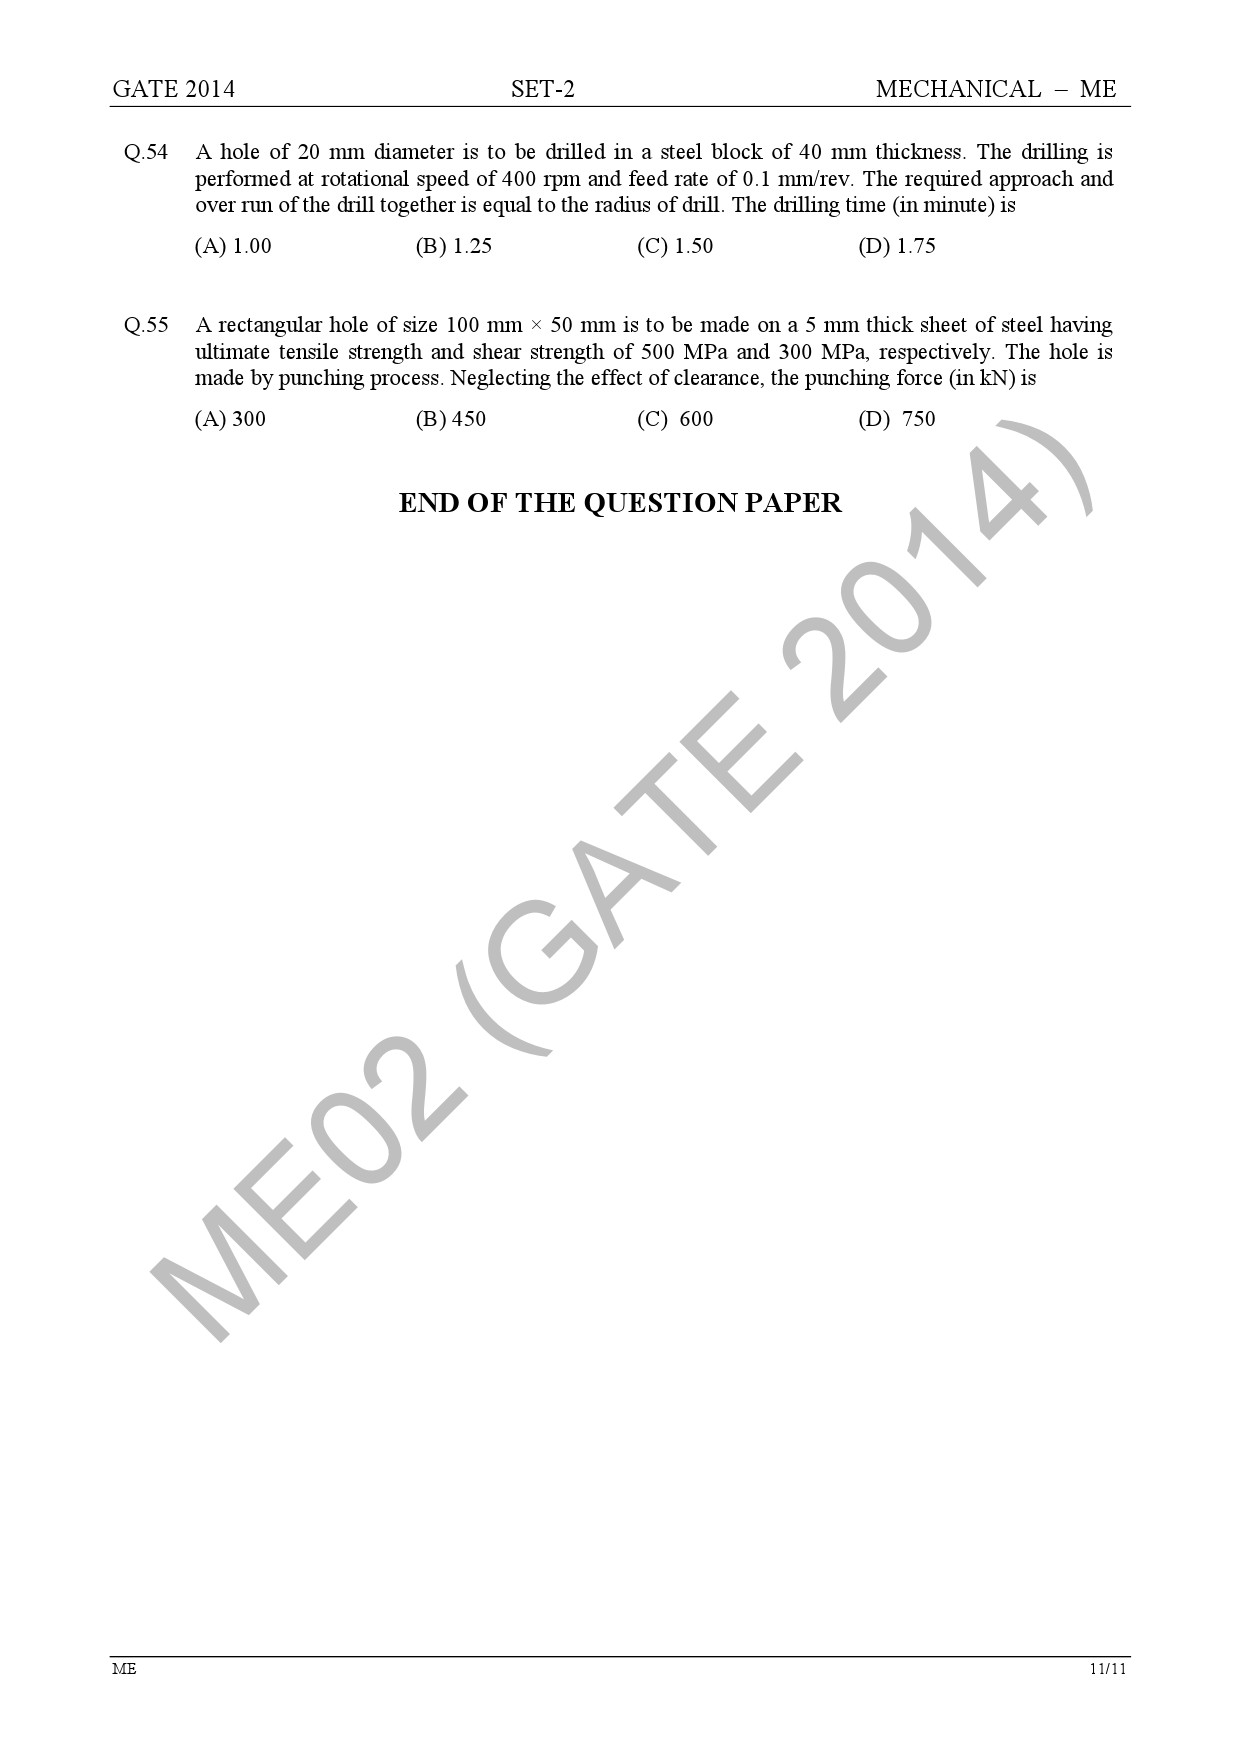 GATE Exam Question Paper 2014 Mechanical Engineering Set 2 17